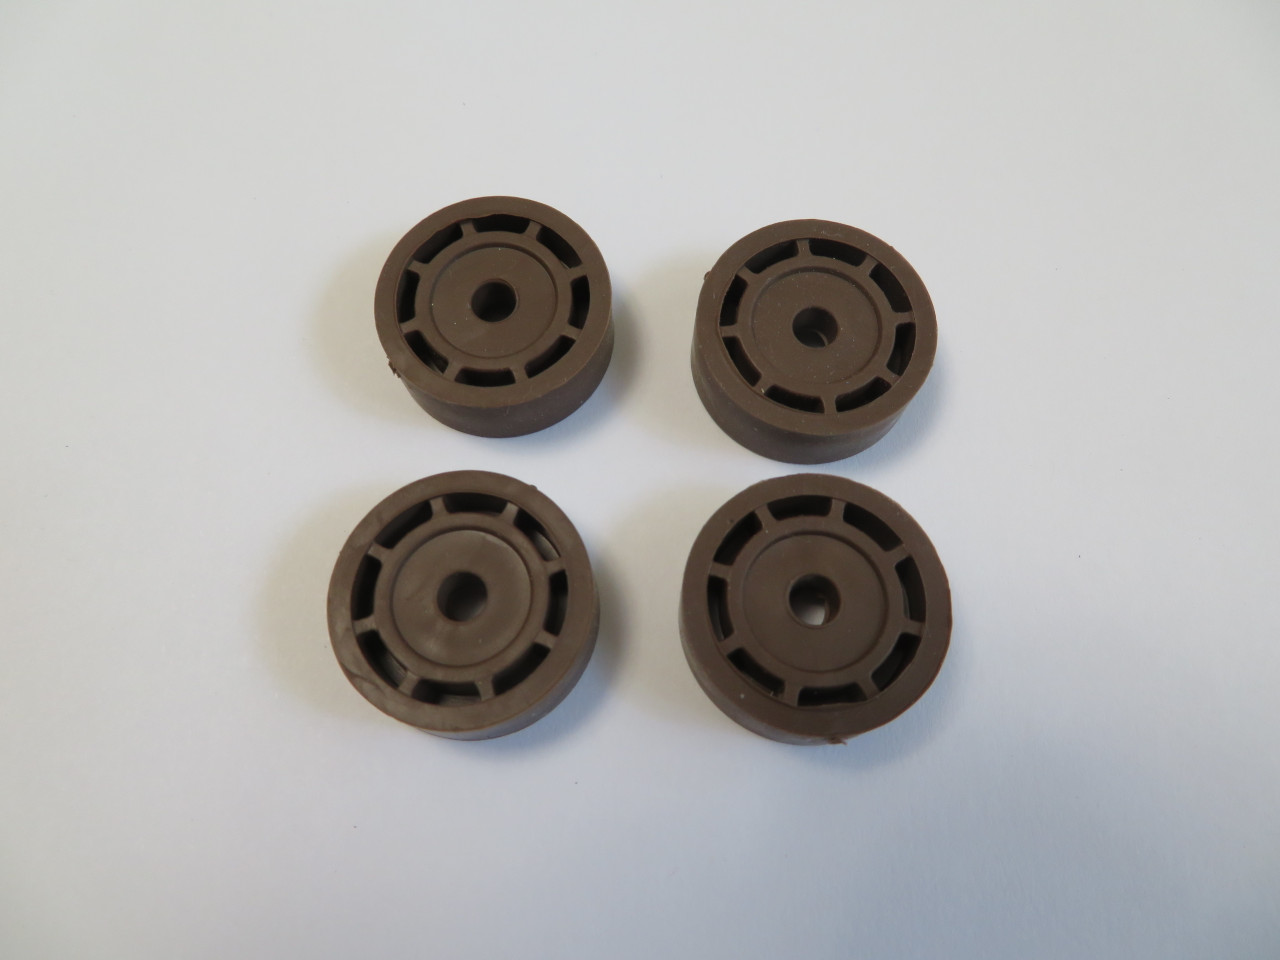 Western Electric 500 Telephone Rubber Feet And Rivets For Bottom Old Phone Shop